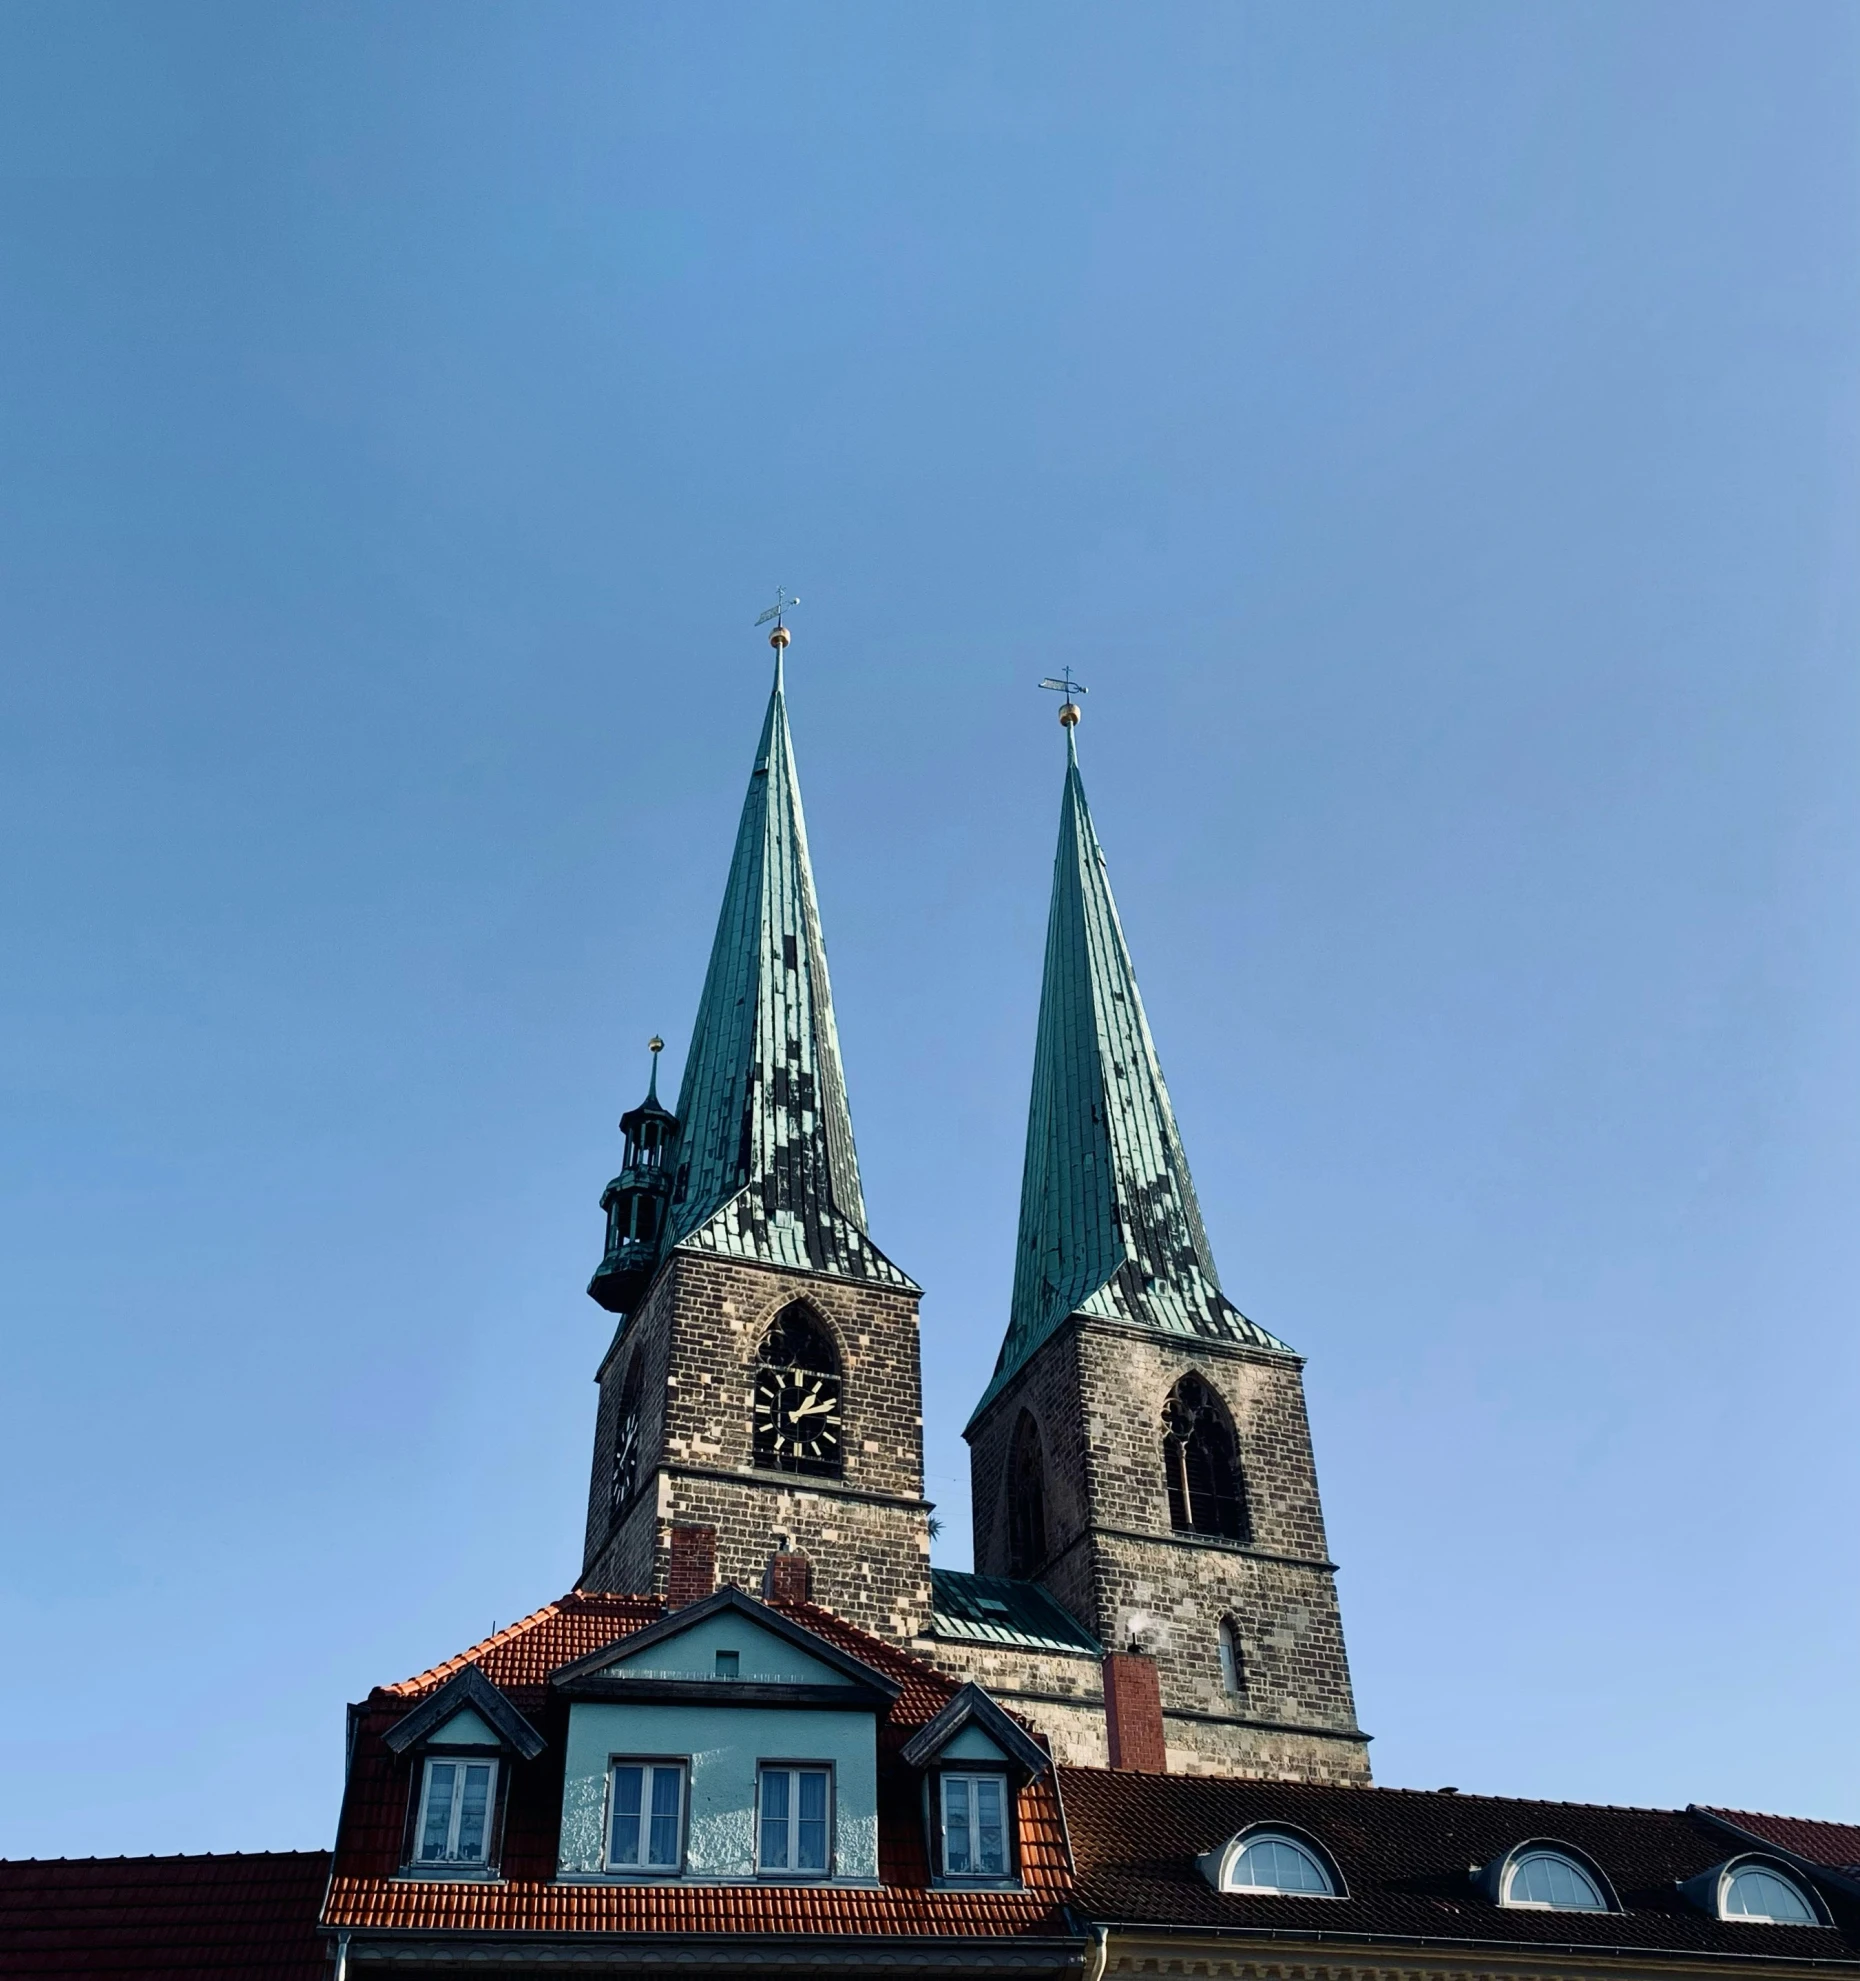 two steeples on a very tall building with a clock